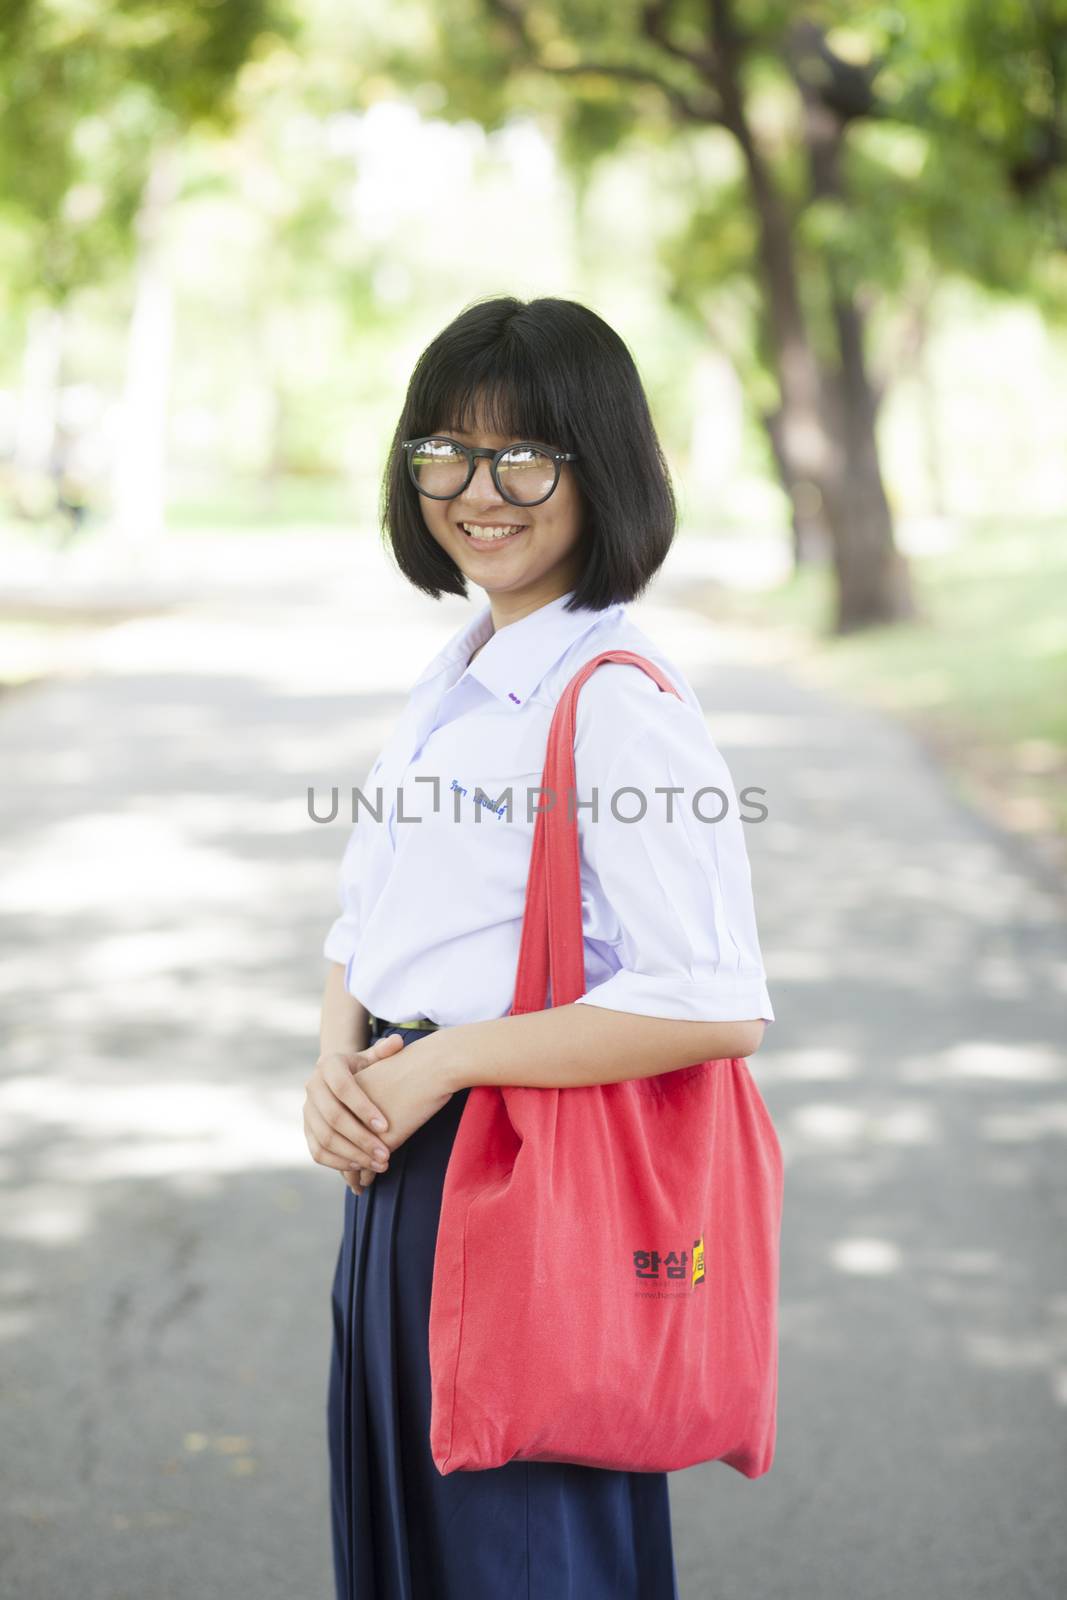 Female students. Red carrying bag Asian girl standing on a walkway in the park.